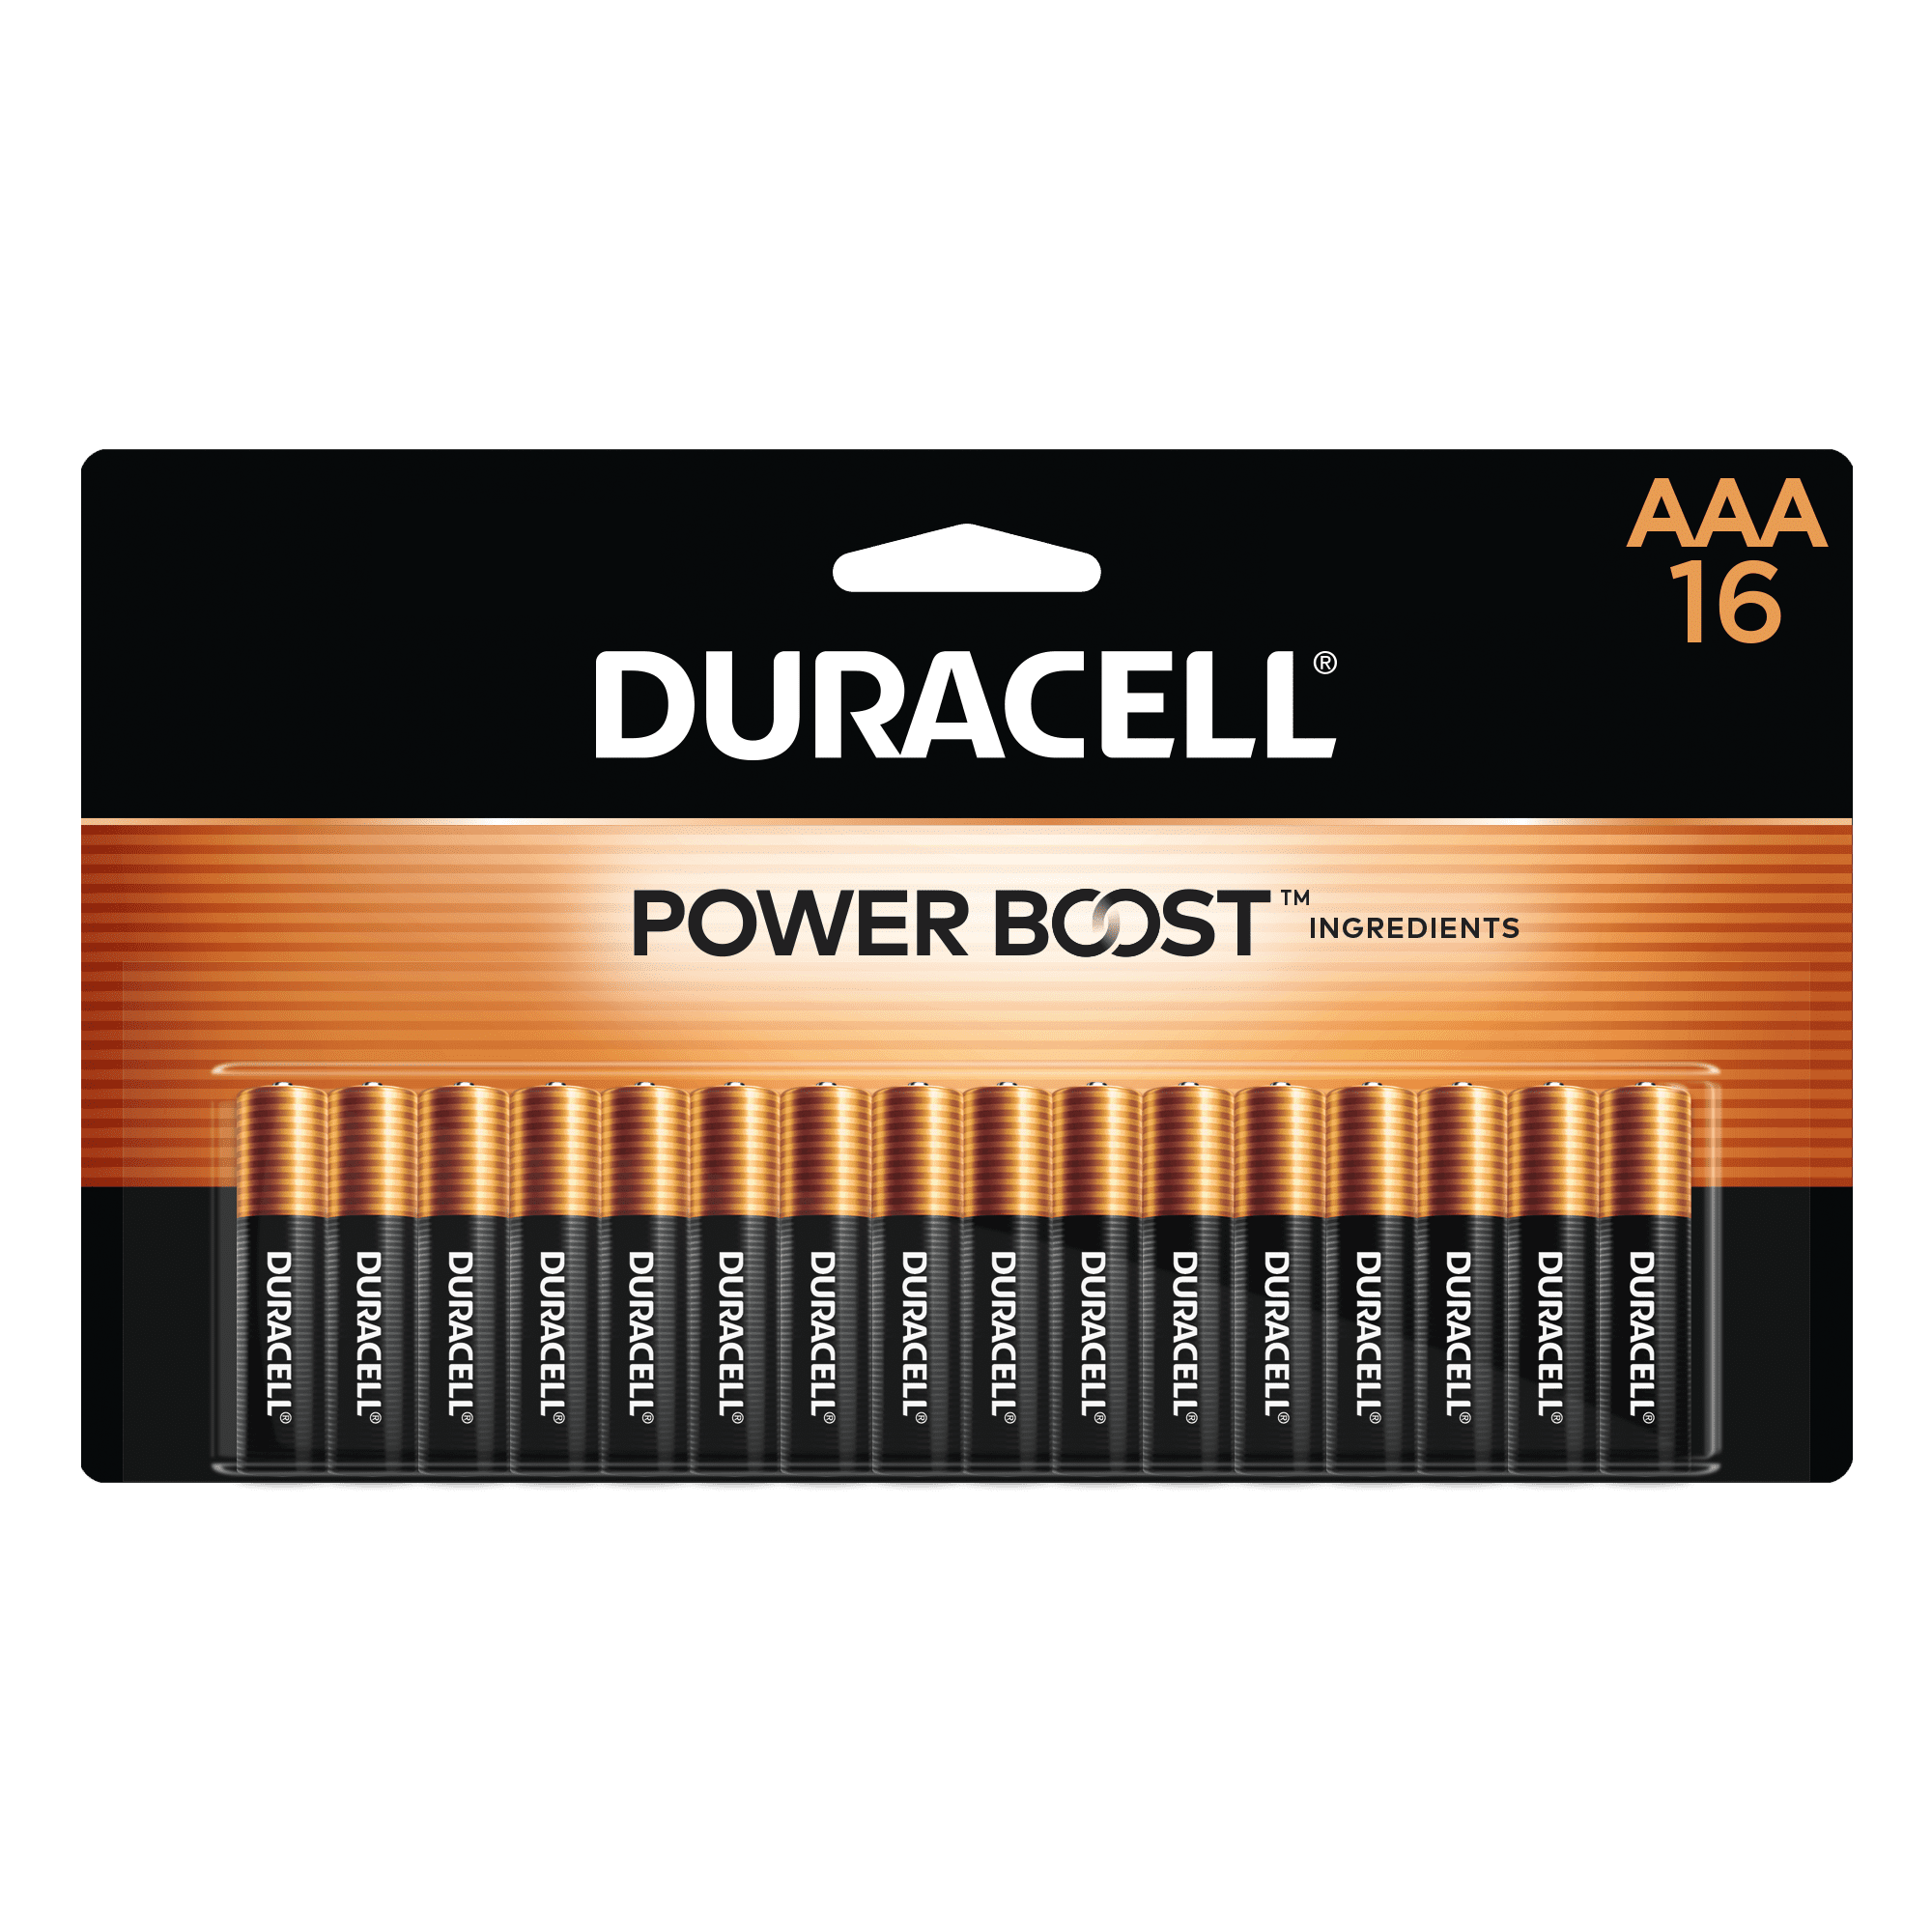 Duracell Coppertop AAA Battery with POWER BOOST, 16 Pack Long-Lasting Batteries